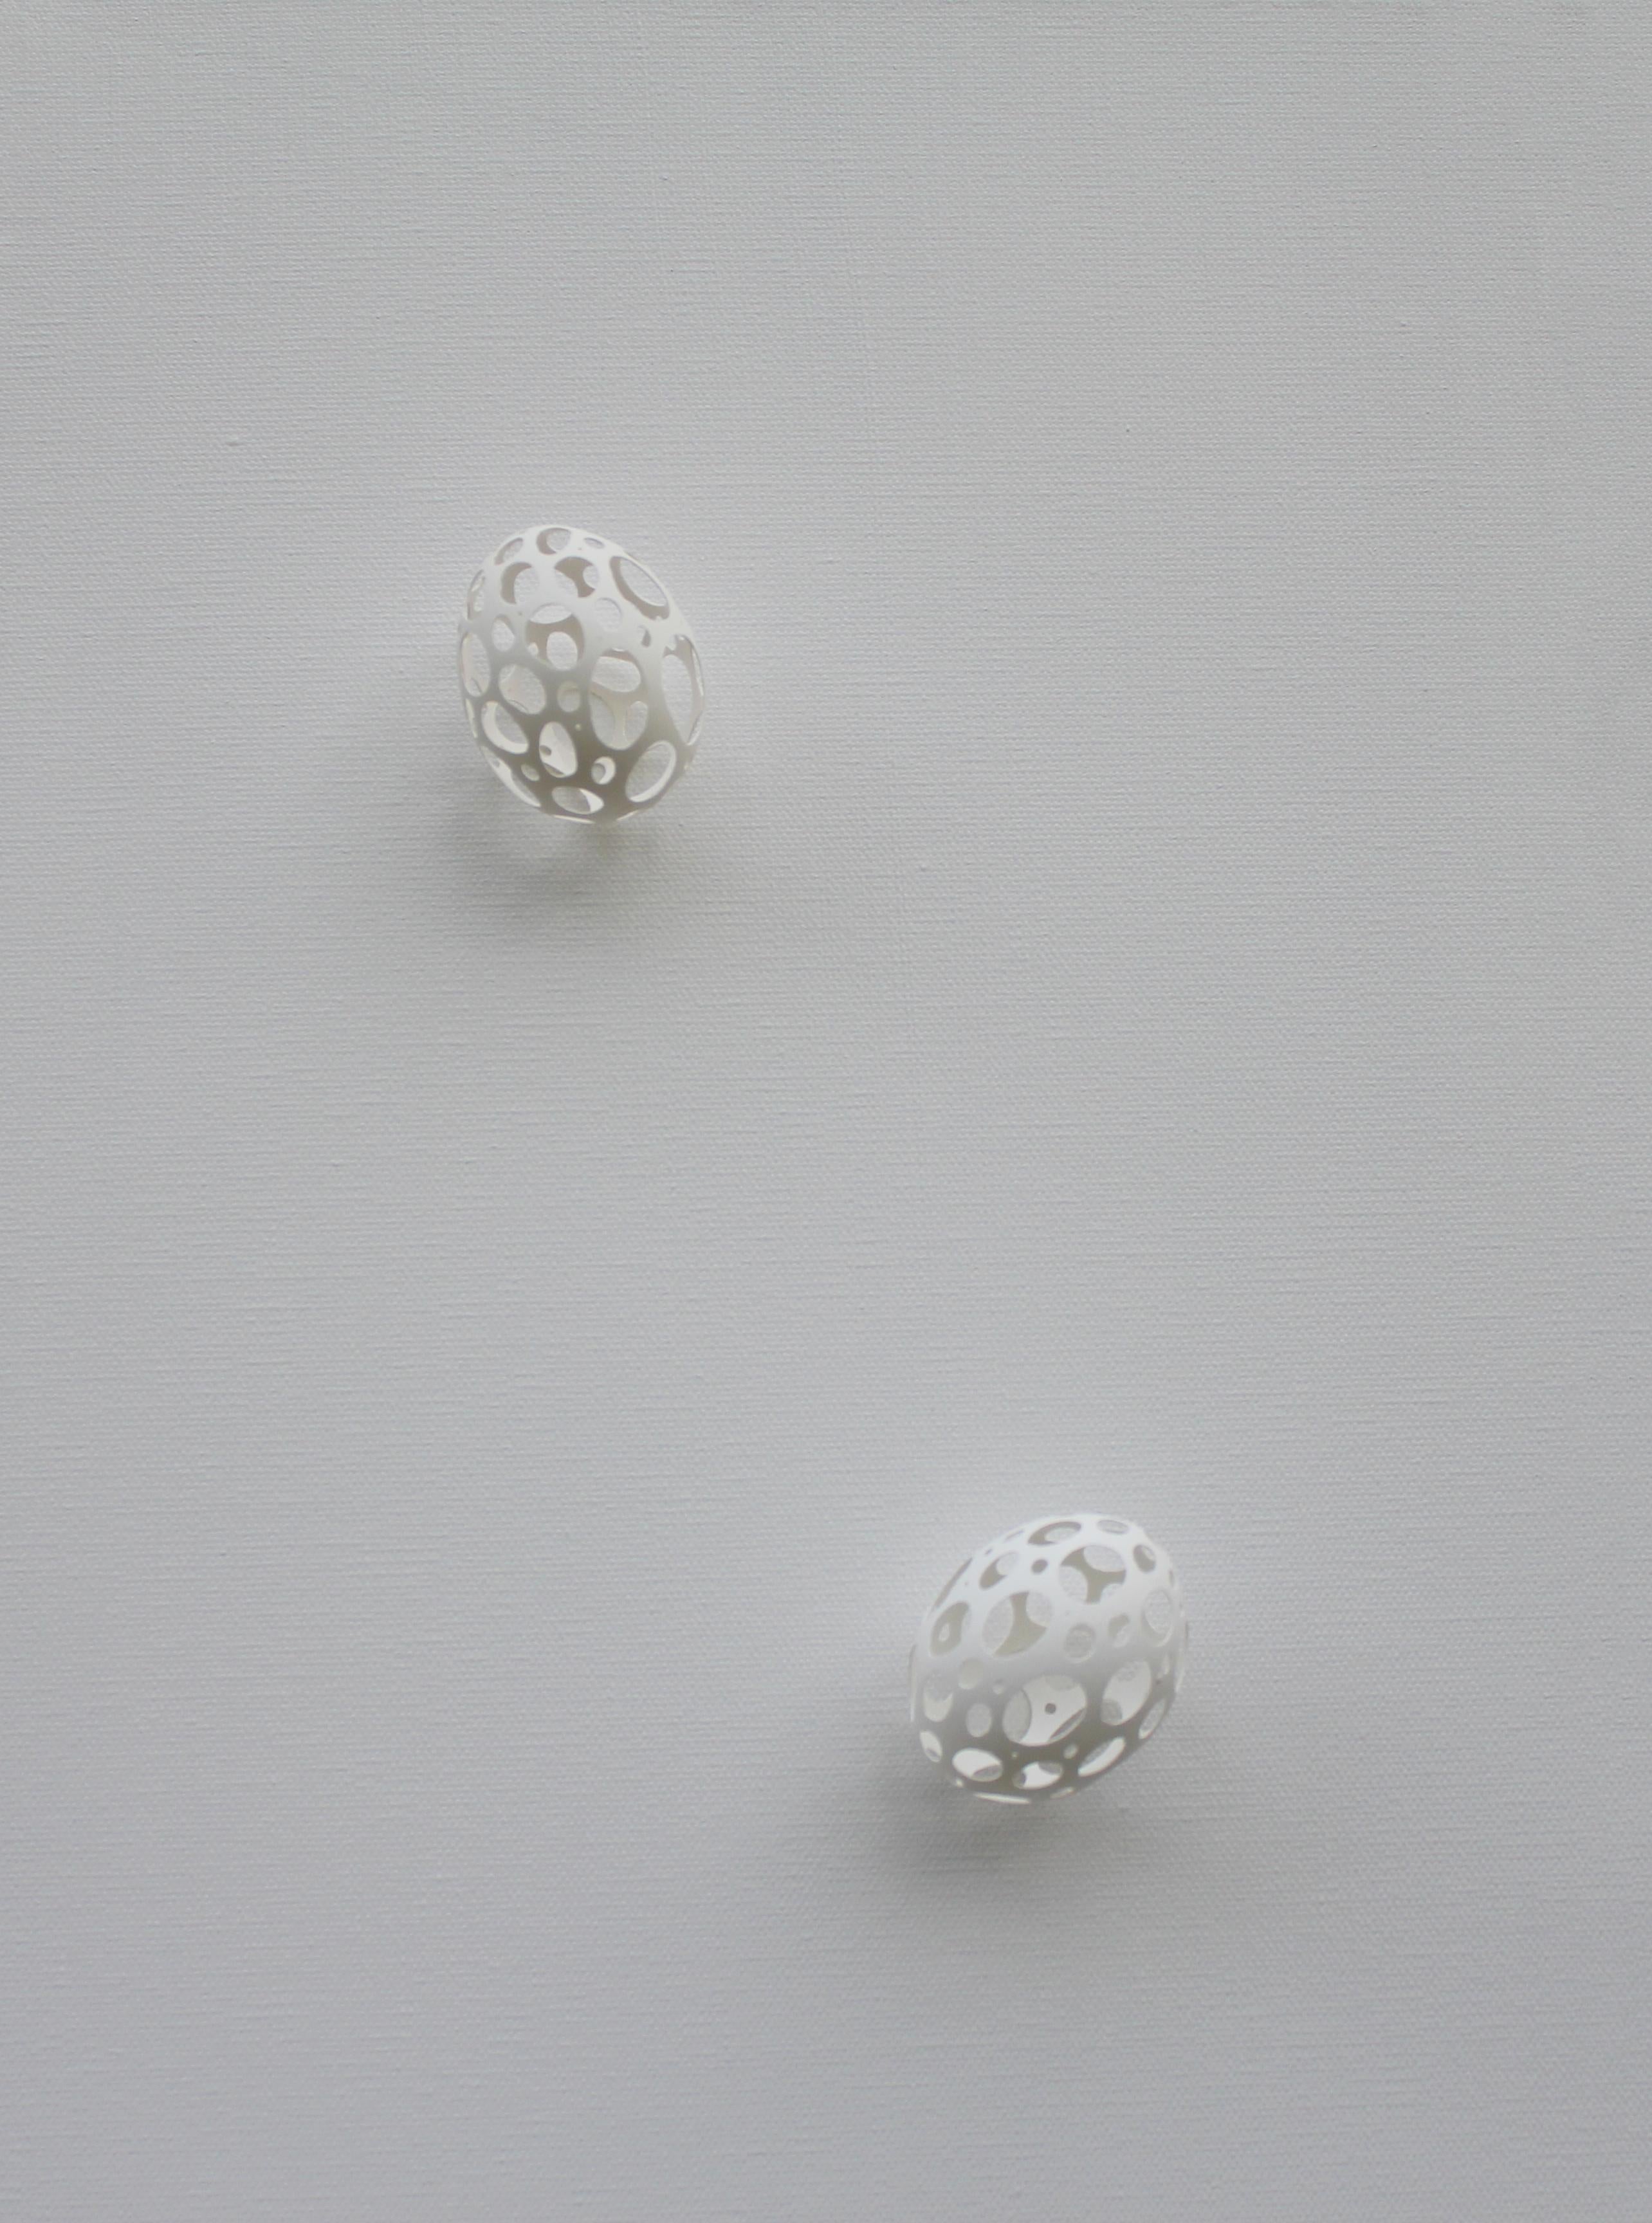 The strength and fragility of humanity is revealed in Larisa Safaryan‘s works. The smooth shape of an egg is the artist‘s “canvas” upon which ideas about life, renewal and rebirth are formed. Her work is like nothing that exists at this